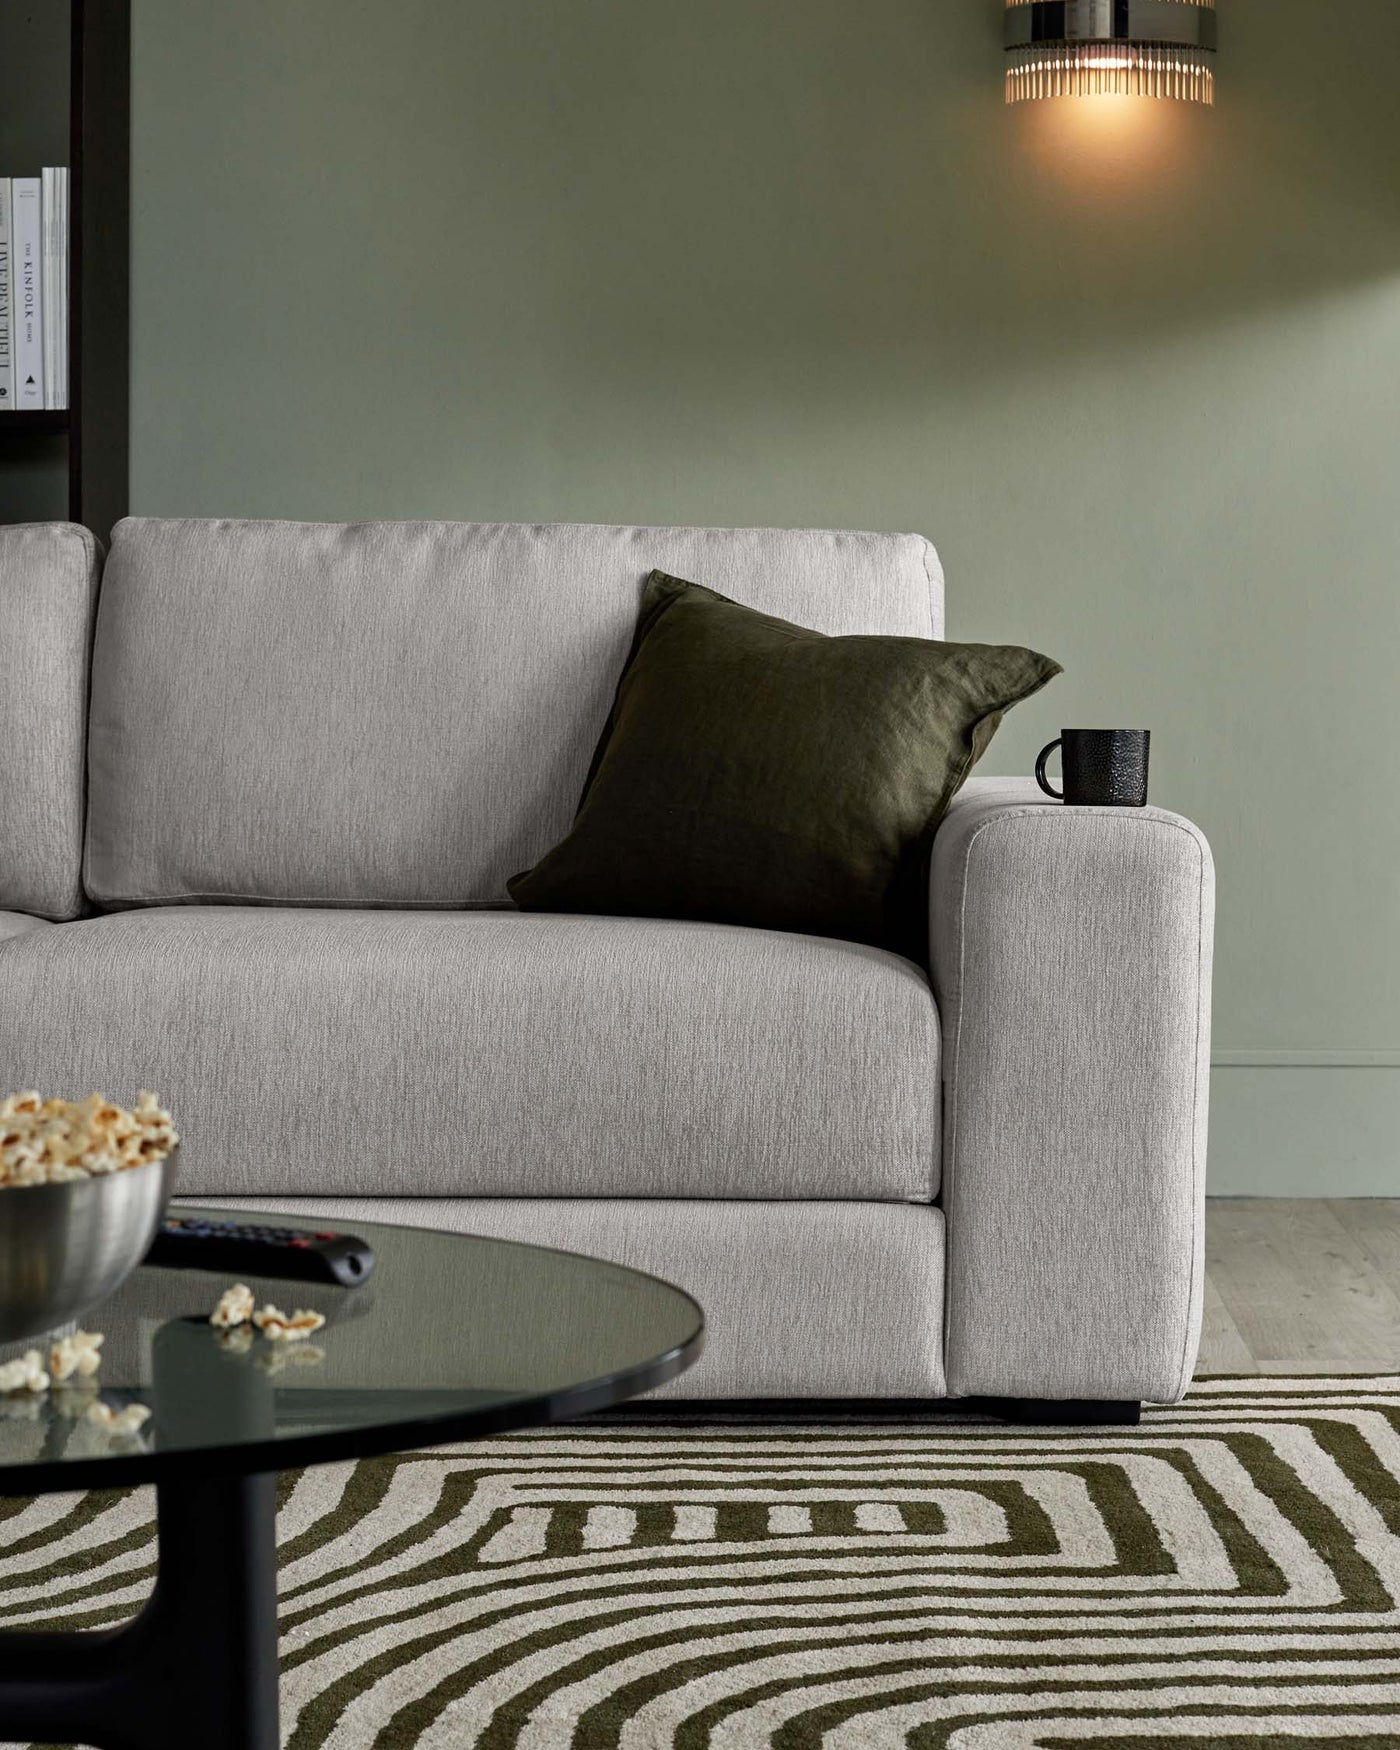 Contemporary light grey fabric sofa with plush cushions and a dark olive green accent pillow. In the foreground, a round black coffee table with a smoked glass top. The furnishings rest on a beige and green geometric patterned area rug.